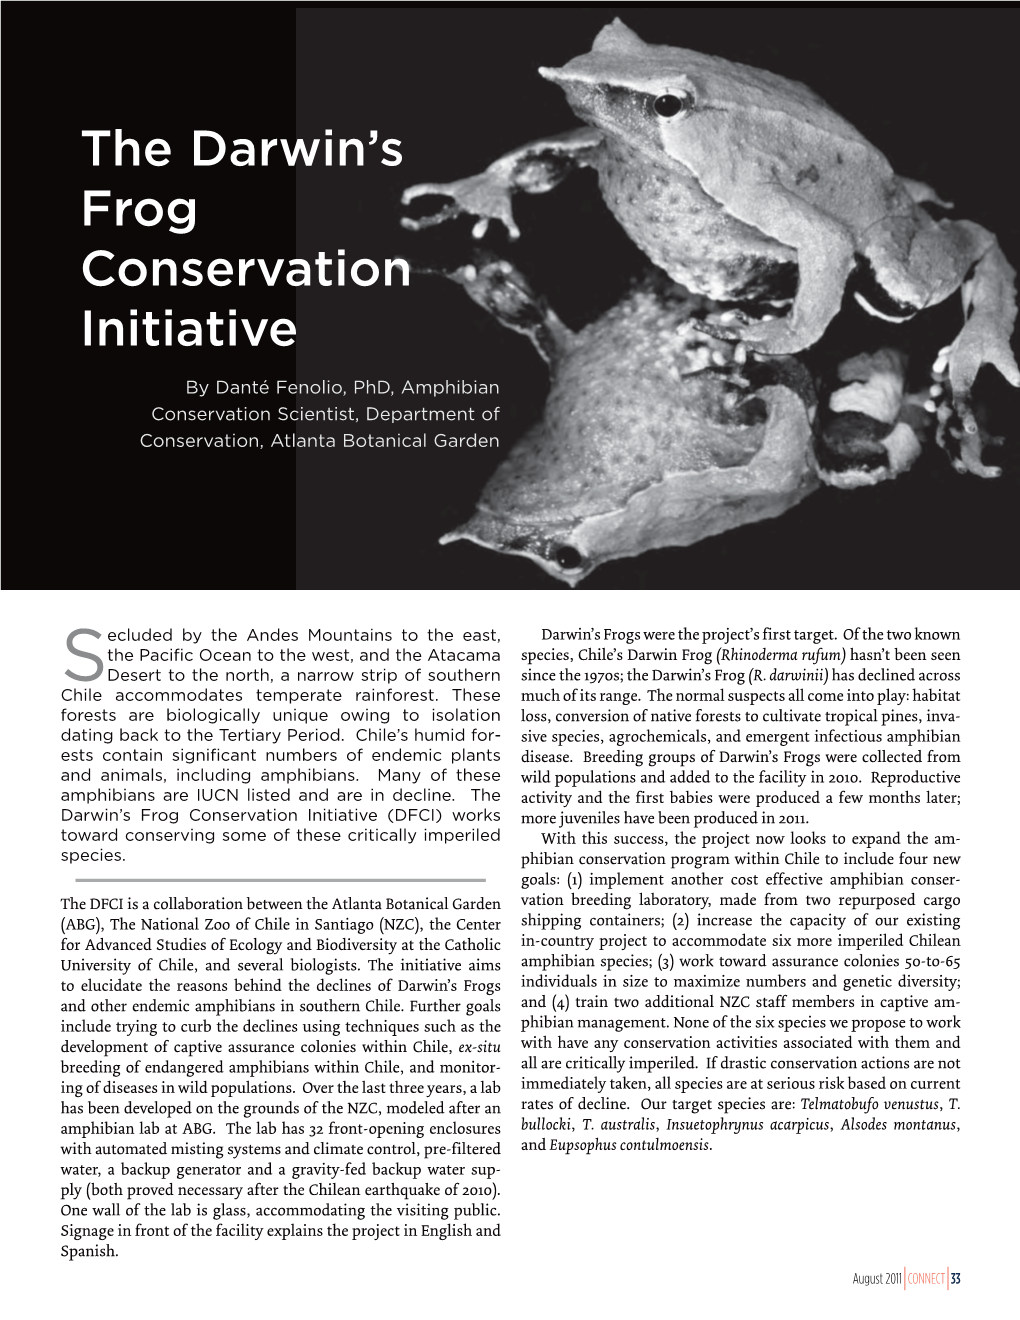 The Darwin's Frog Conservation Initiative